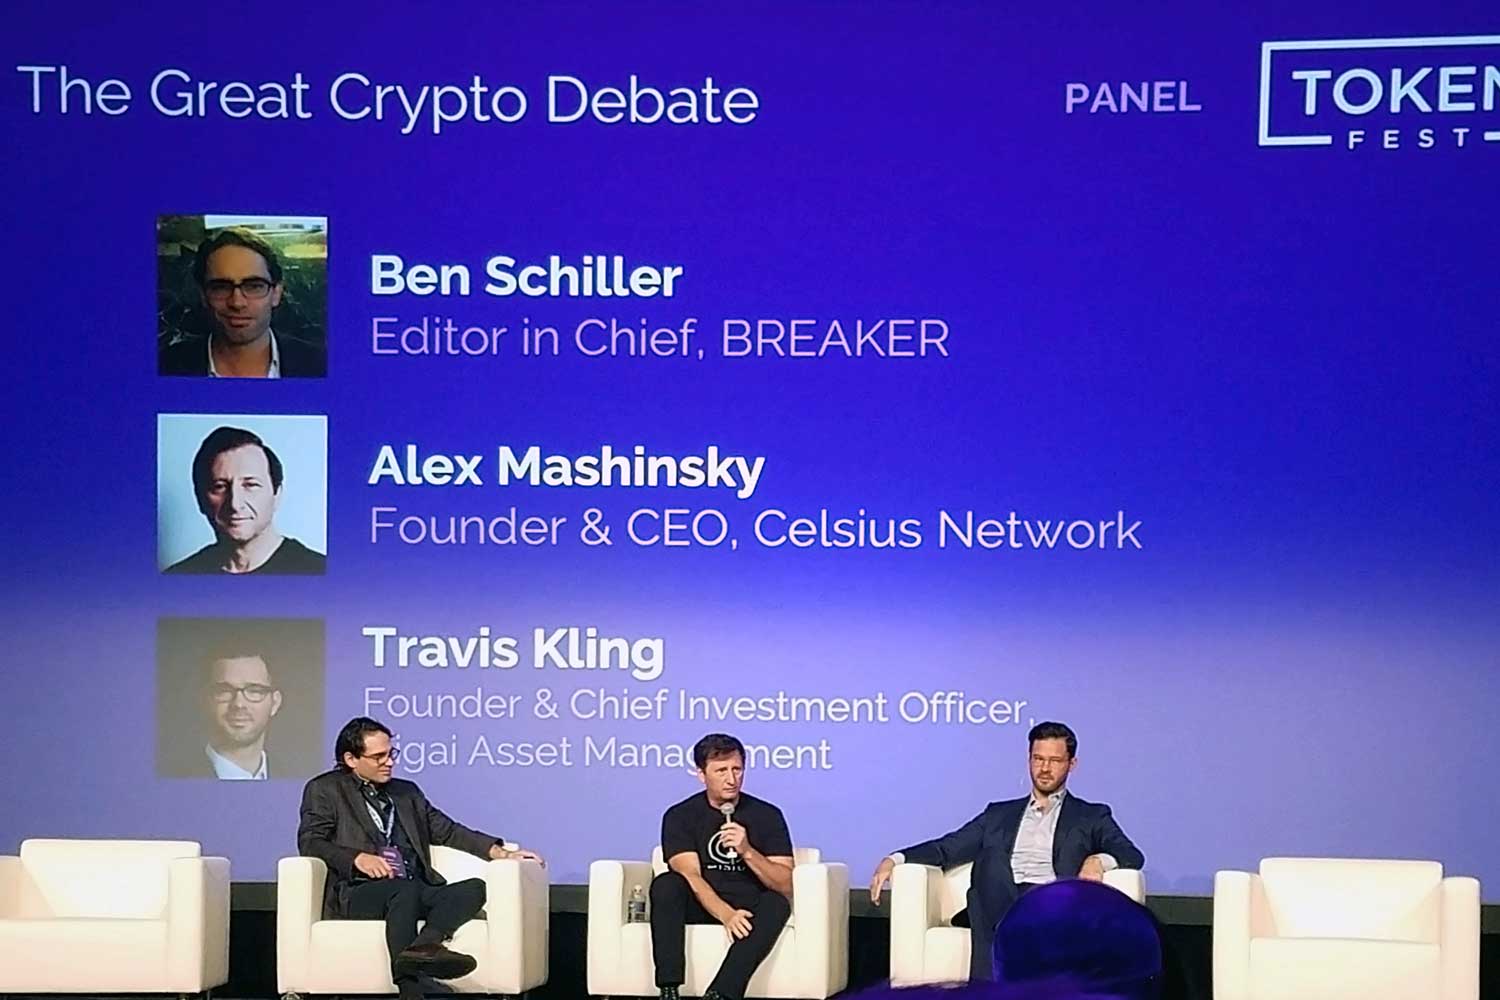 The Great Crypto Debate - TokenFest Boston